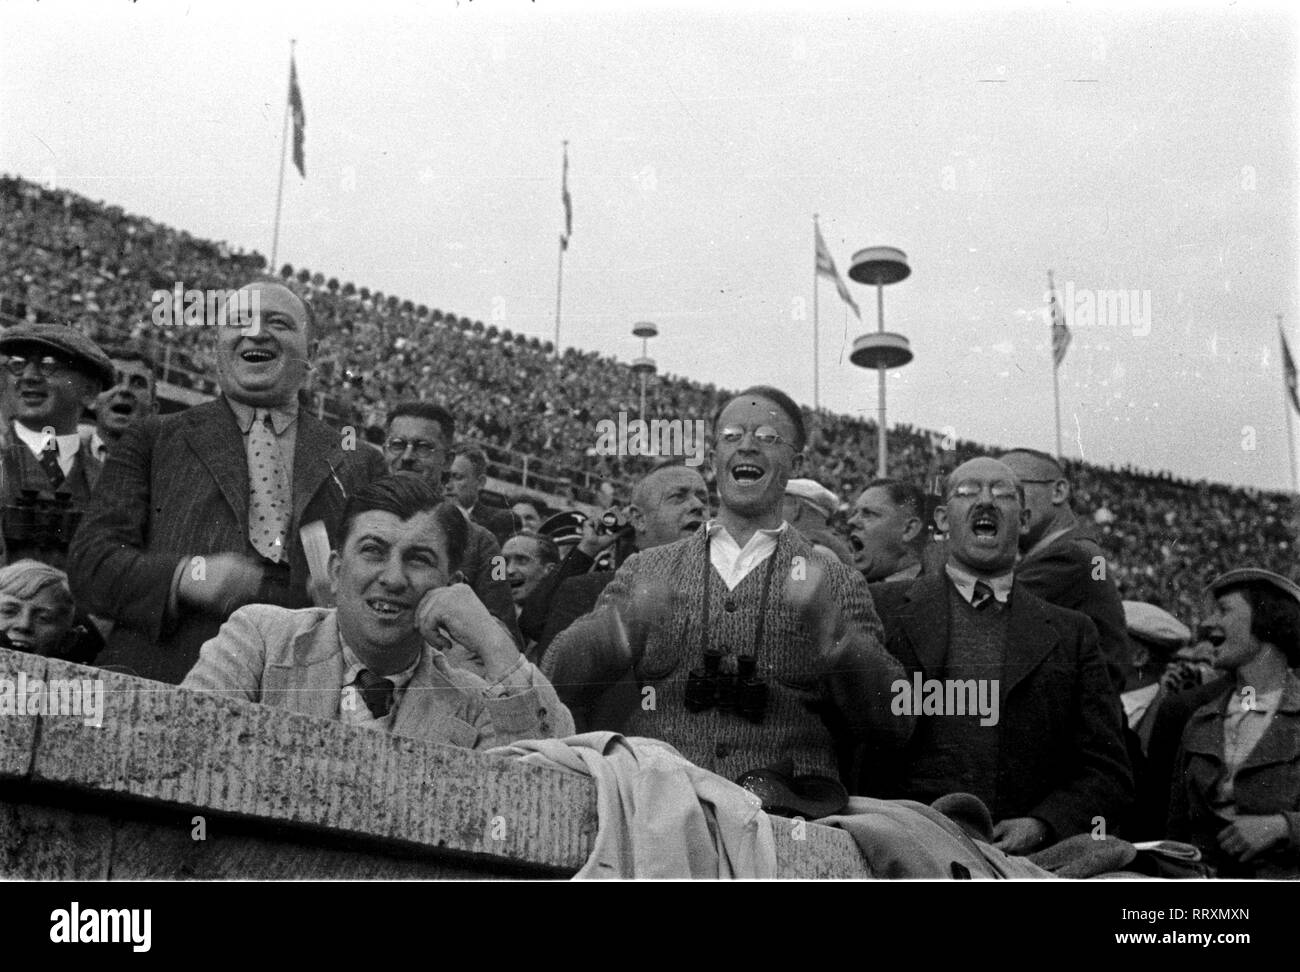 Summer Olympics 1936 - Germany, Third Reich - Olympic Games, Summer Olympics 1936 in Berlin. Enthusiastic spectators at the Olympic stadium. Image date August 1936. Photo Erich Andres Stock Photo